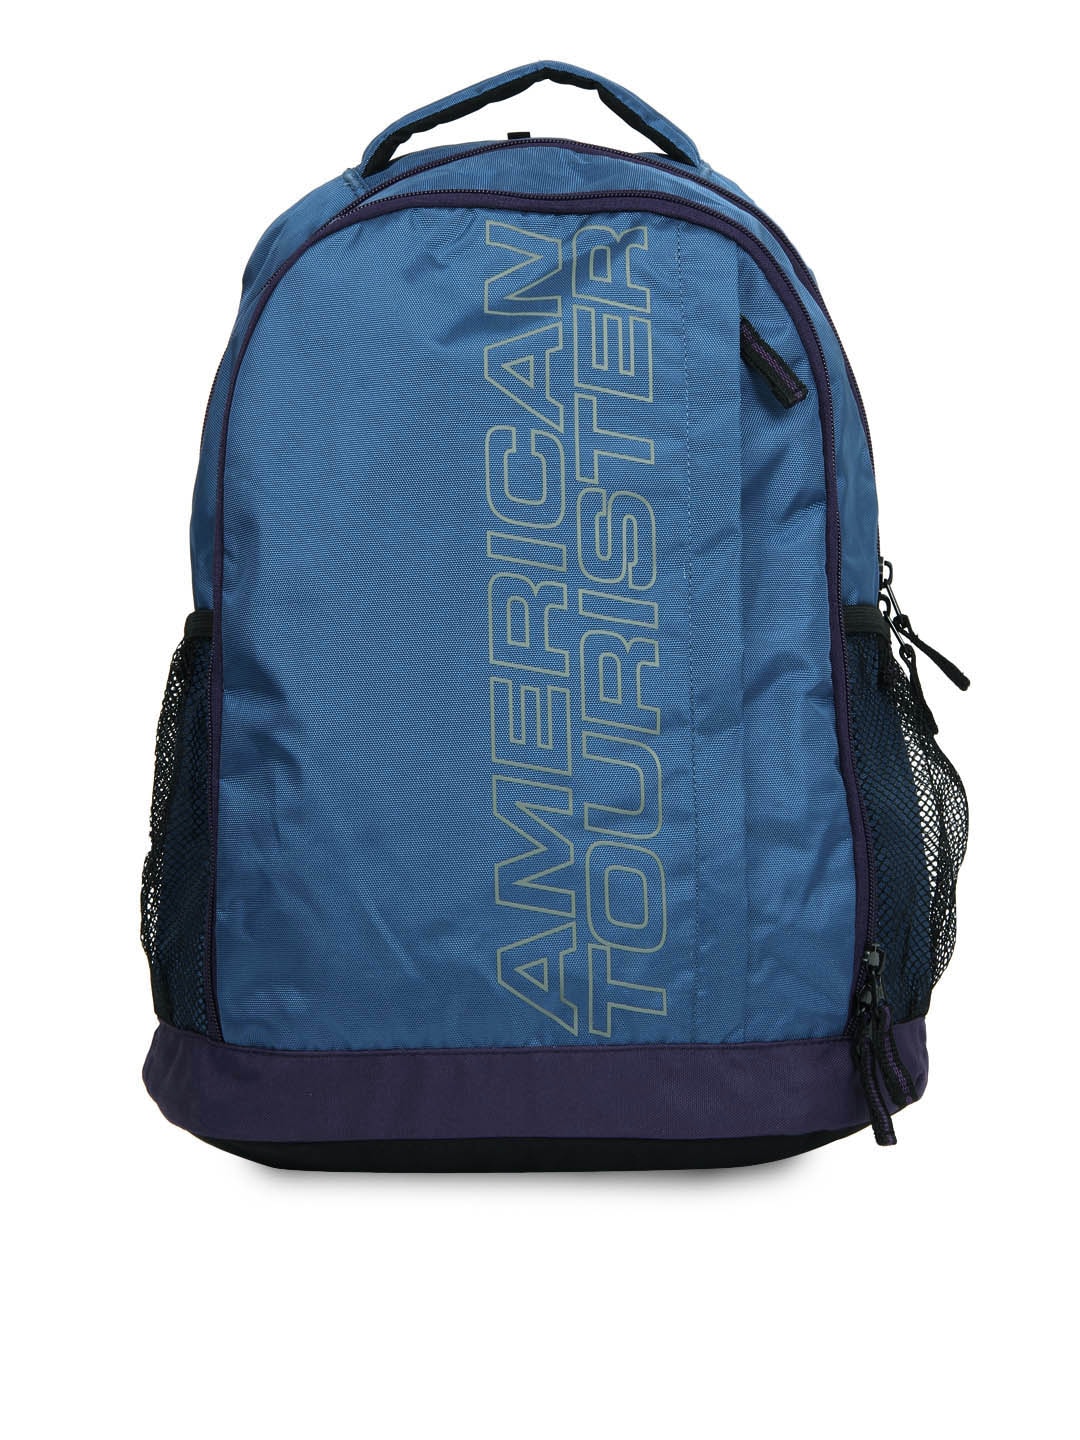 American Tourister Unisex Blue Backpack